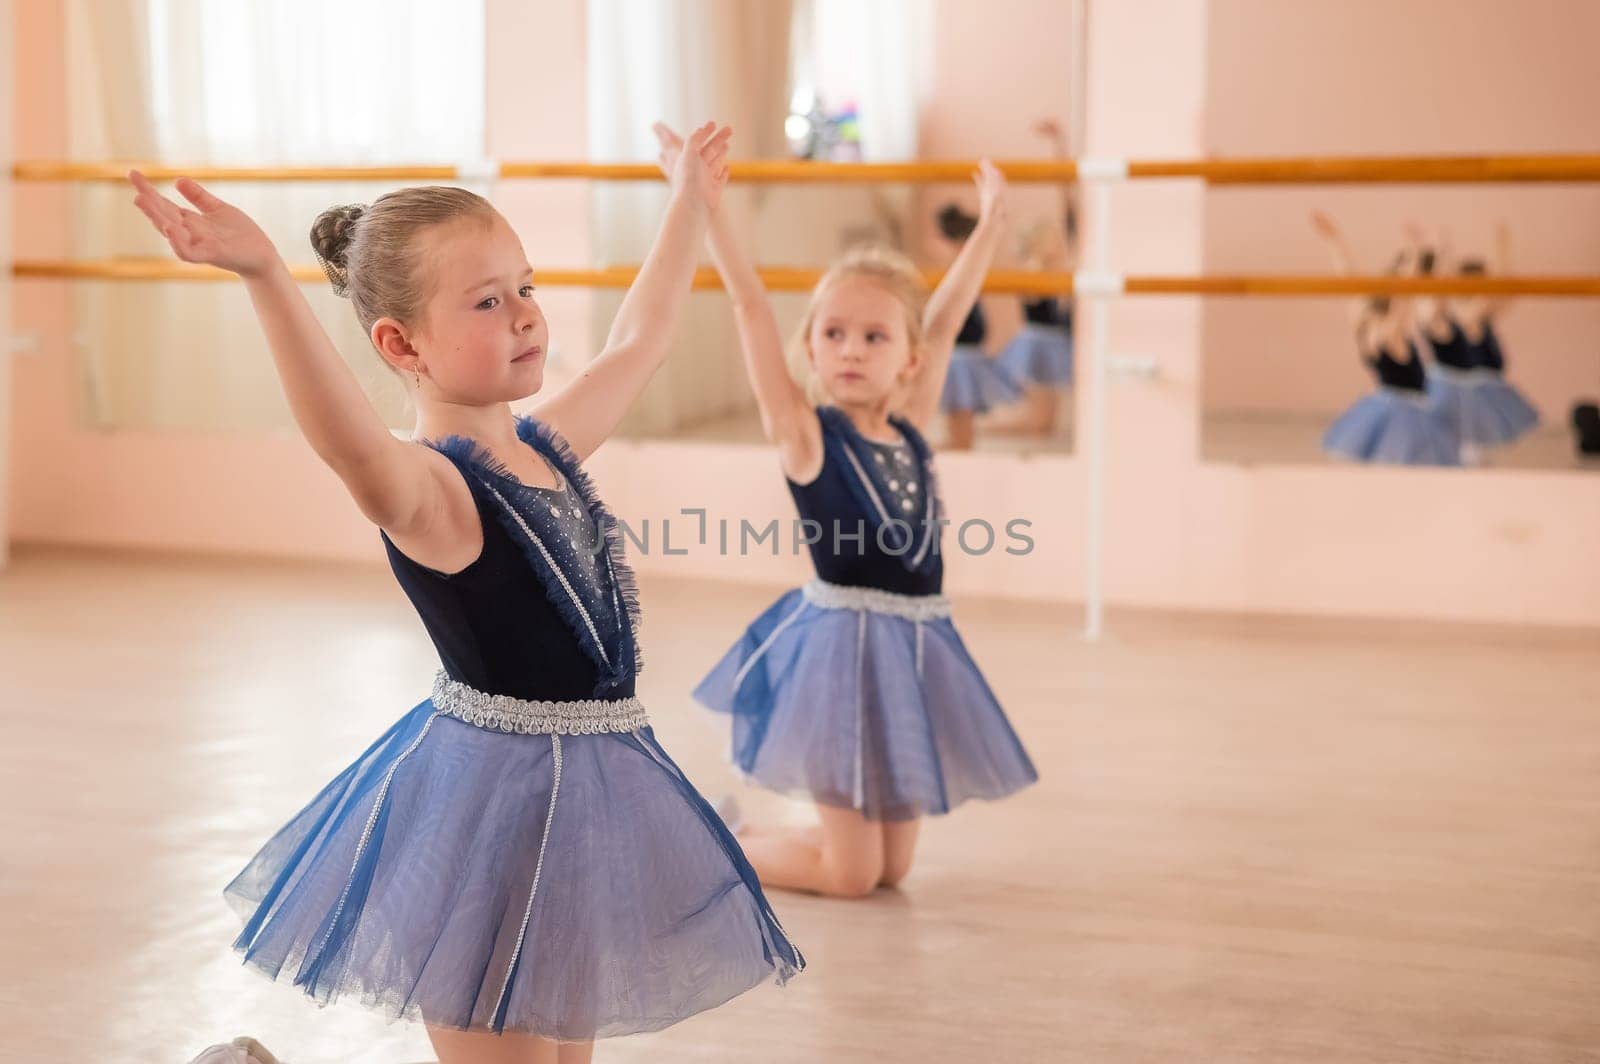 Little ballerinas perform at a dance school. by mrwed54